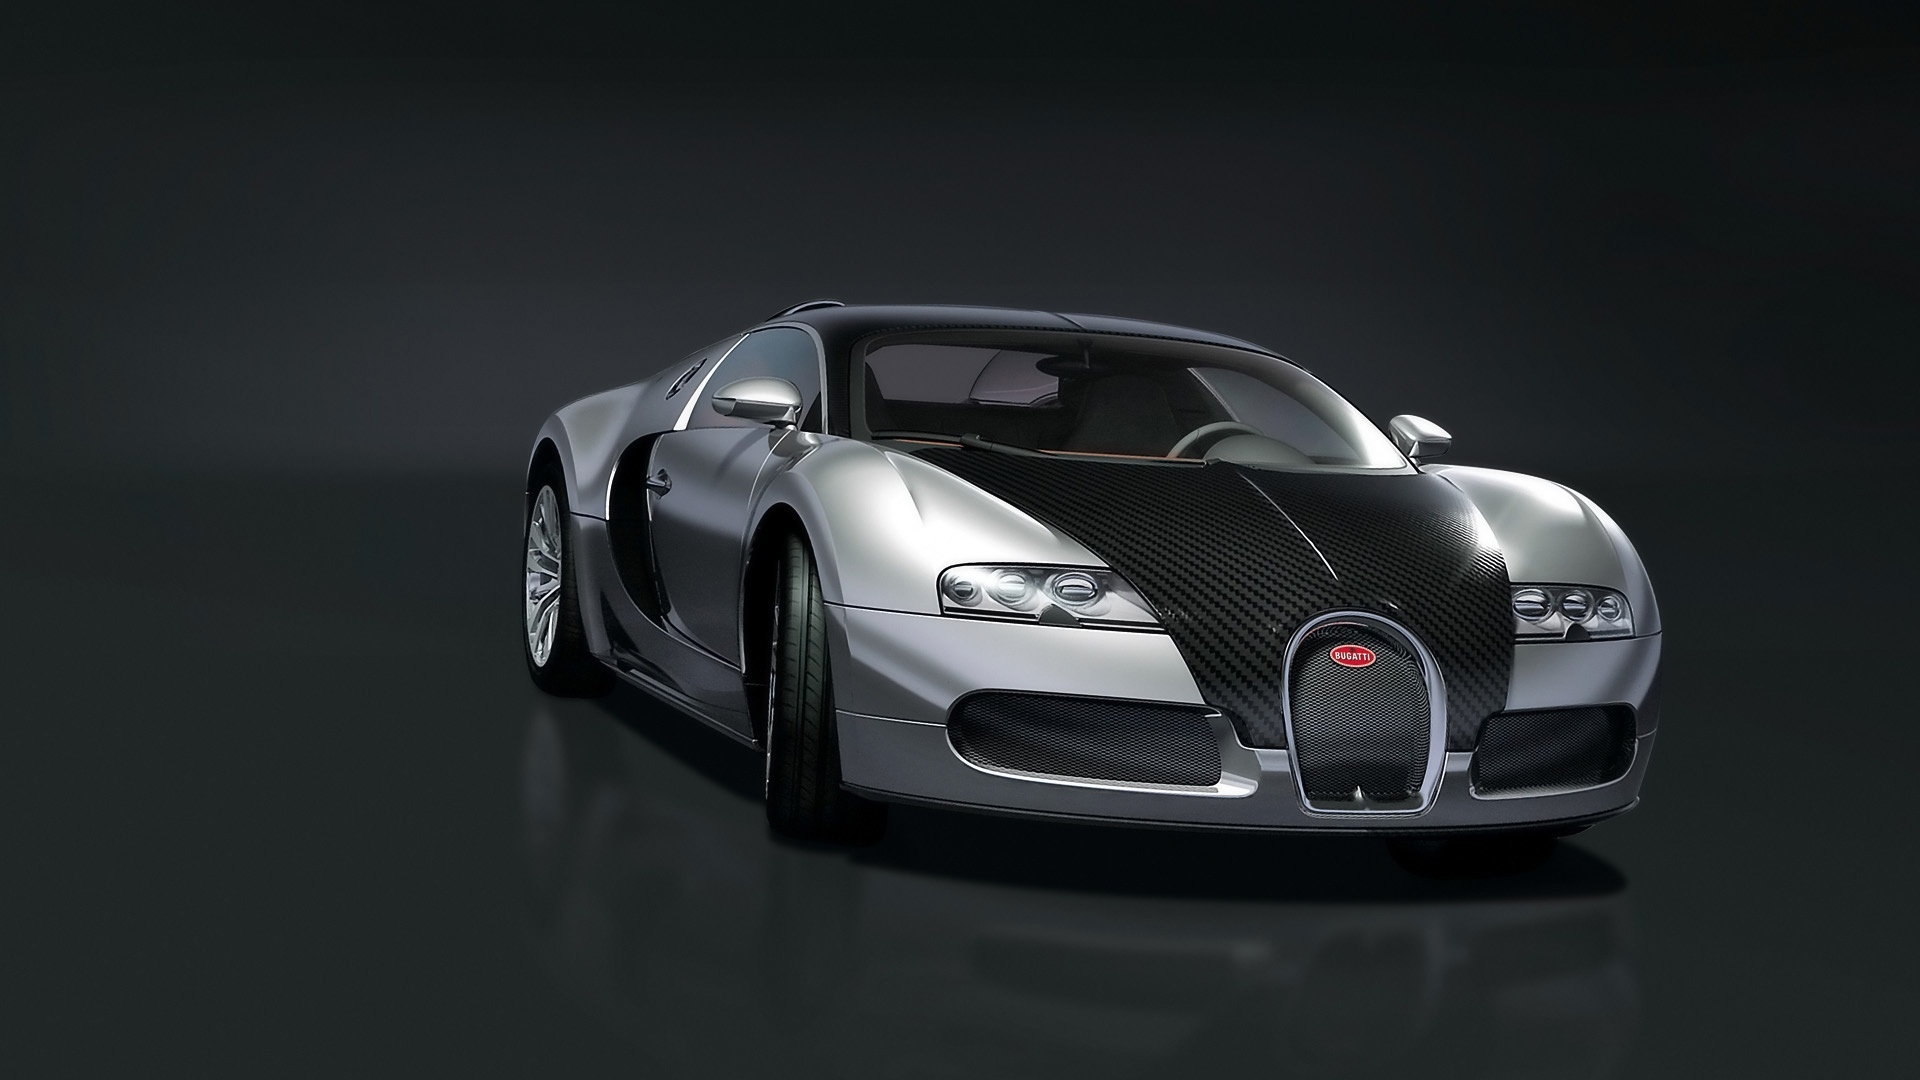 Bugatti EB 16.4 Veyron Pur Sang 2008 - Front Angle for 1920 x 1080 HDTV 1080p resolution